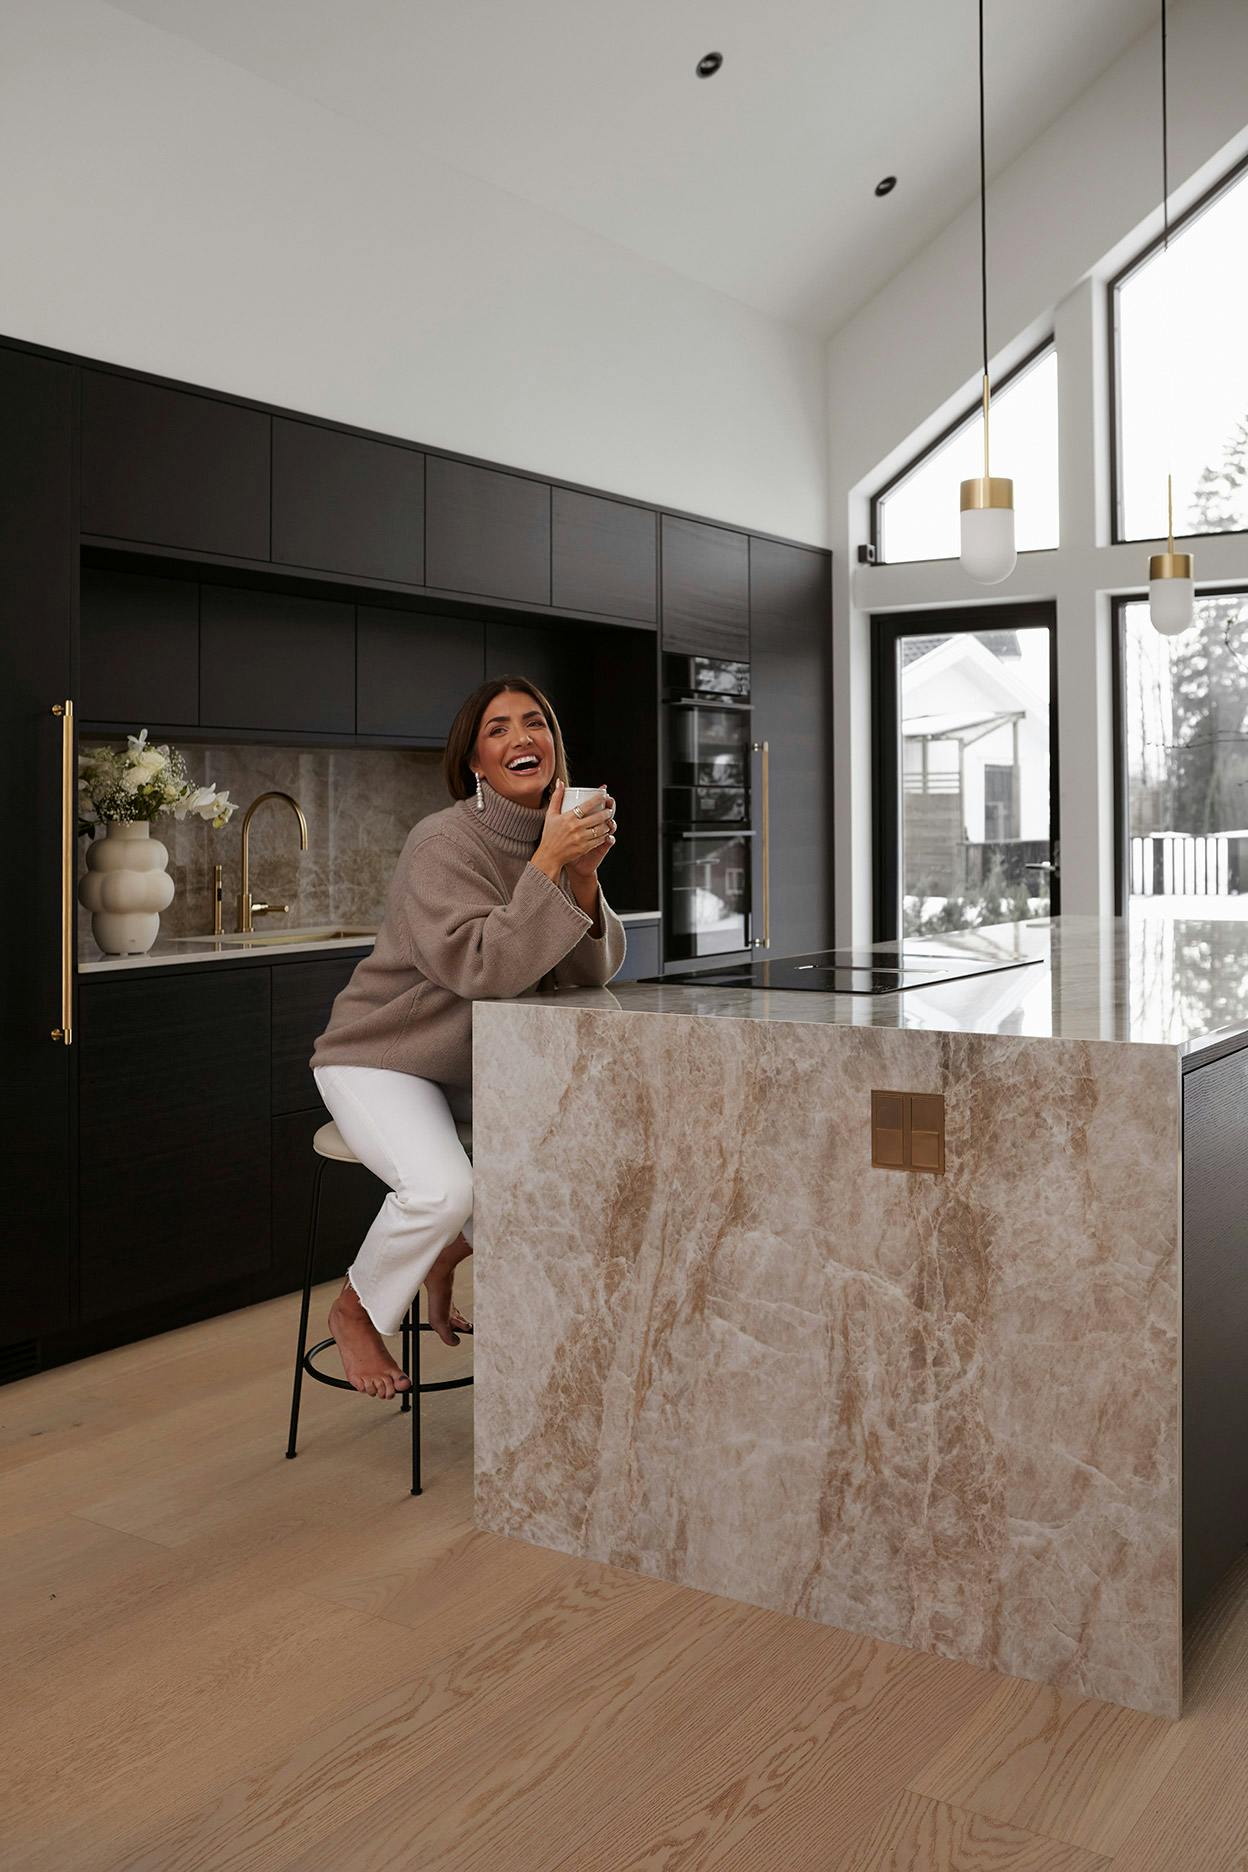 Image of Iselin Guttormsen Birgit Fauske 02 lowres.jpg?auto=format%2Ccompress&ixlib=php 3.3 in {{Dekton Taga gives life to the beautiful kitchen of influencer Iselin Guttormsen}} - Cosentino